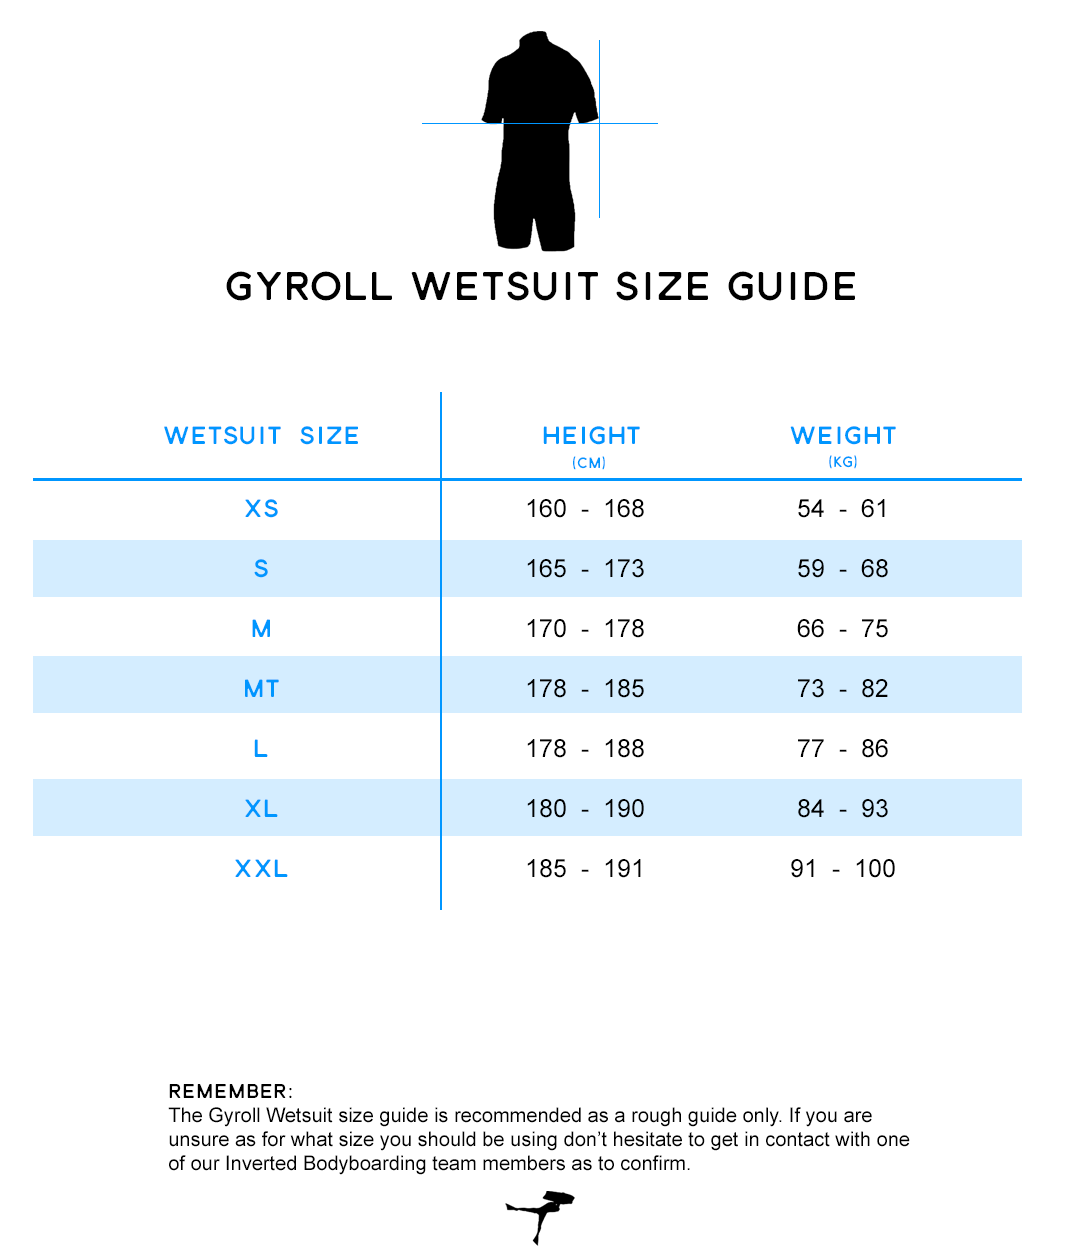 Gyroll Wetsuit Size Guide at Inverted Bodyboarding